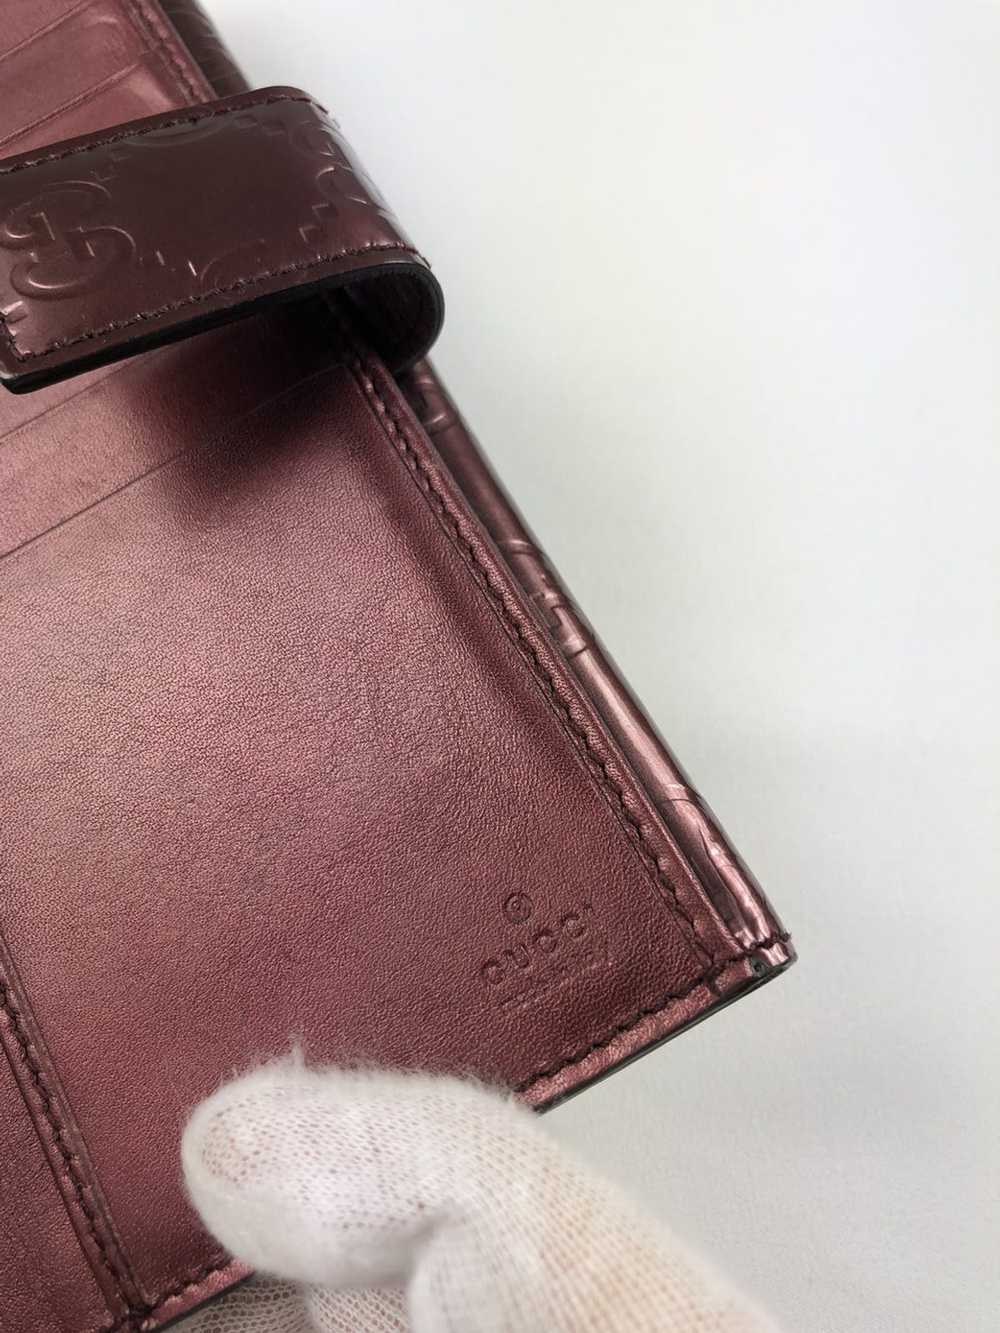 Gucci Gucci GG guccissima leather long wallet - image 3